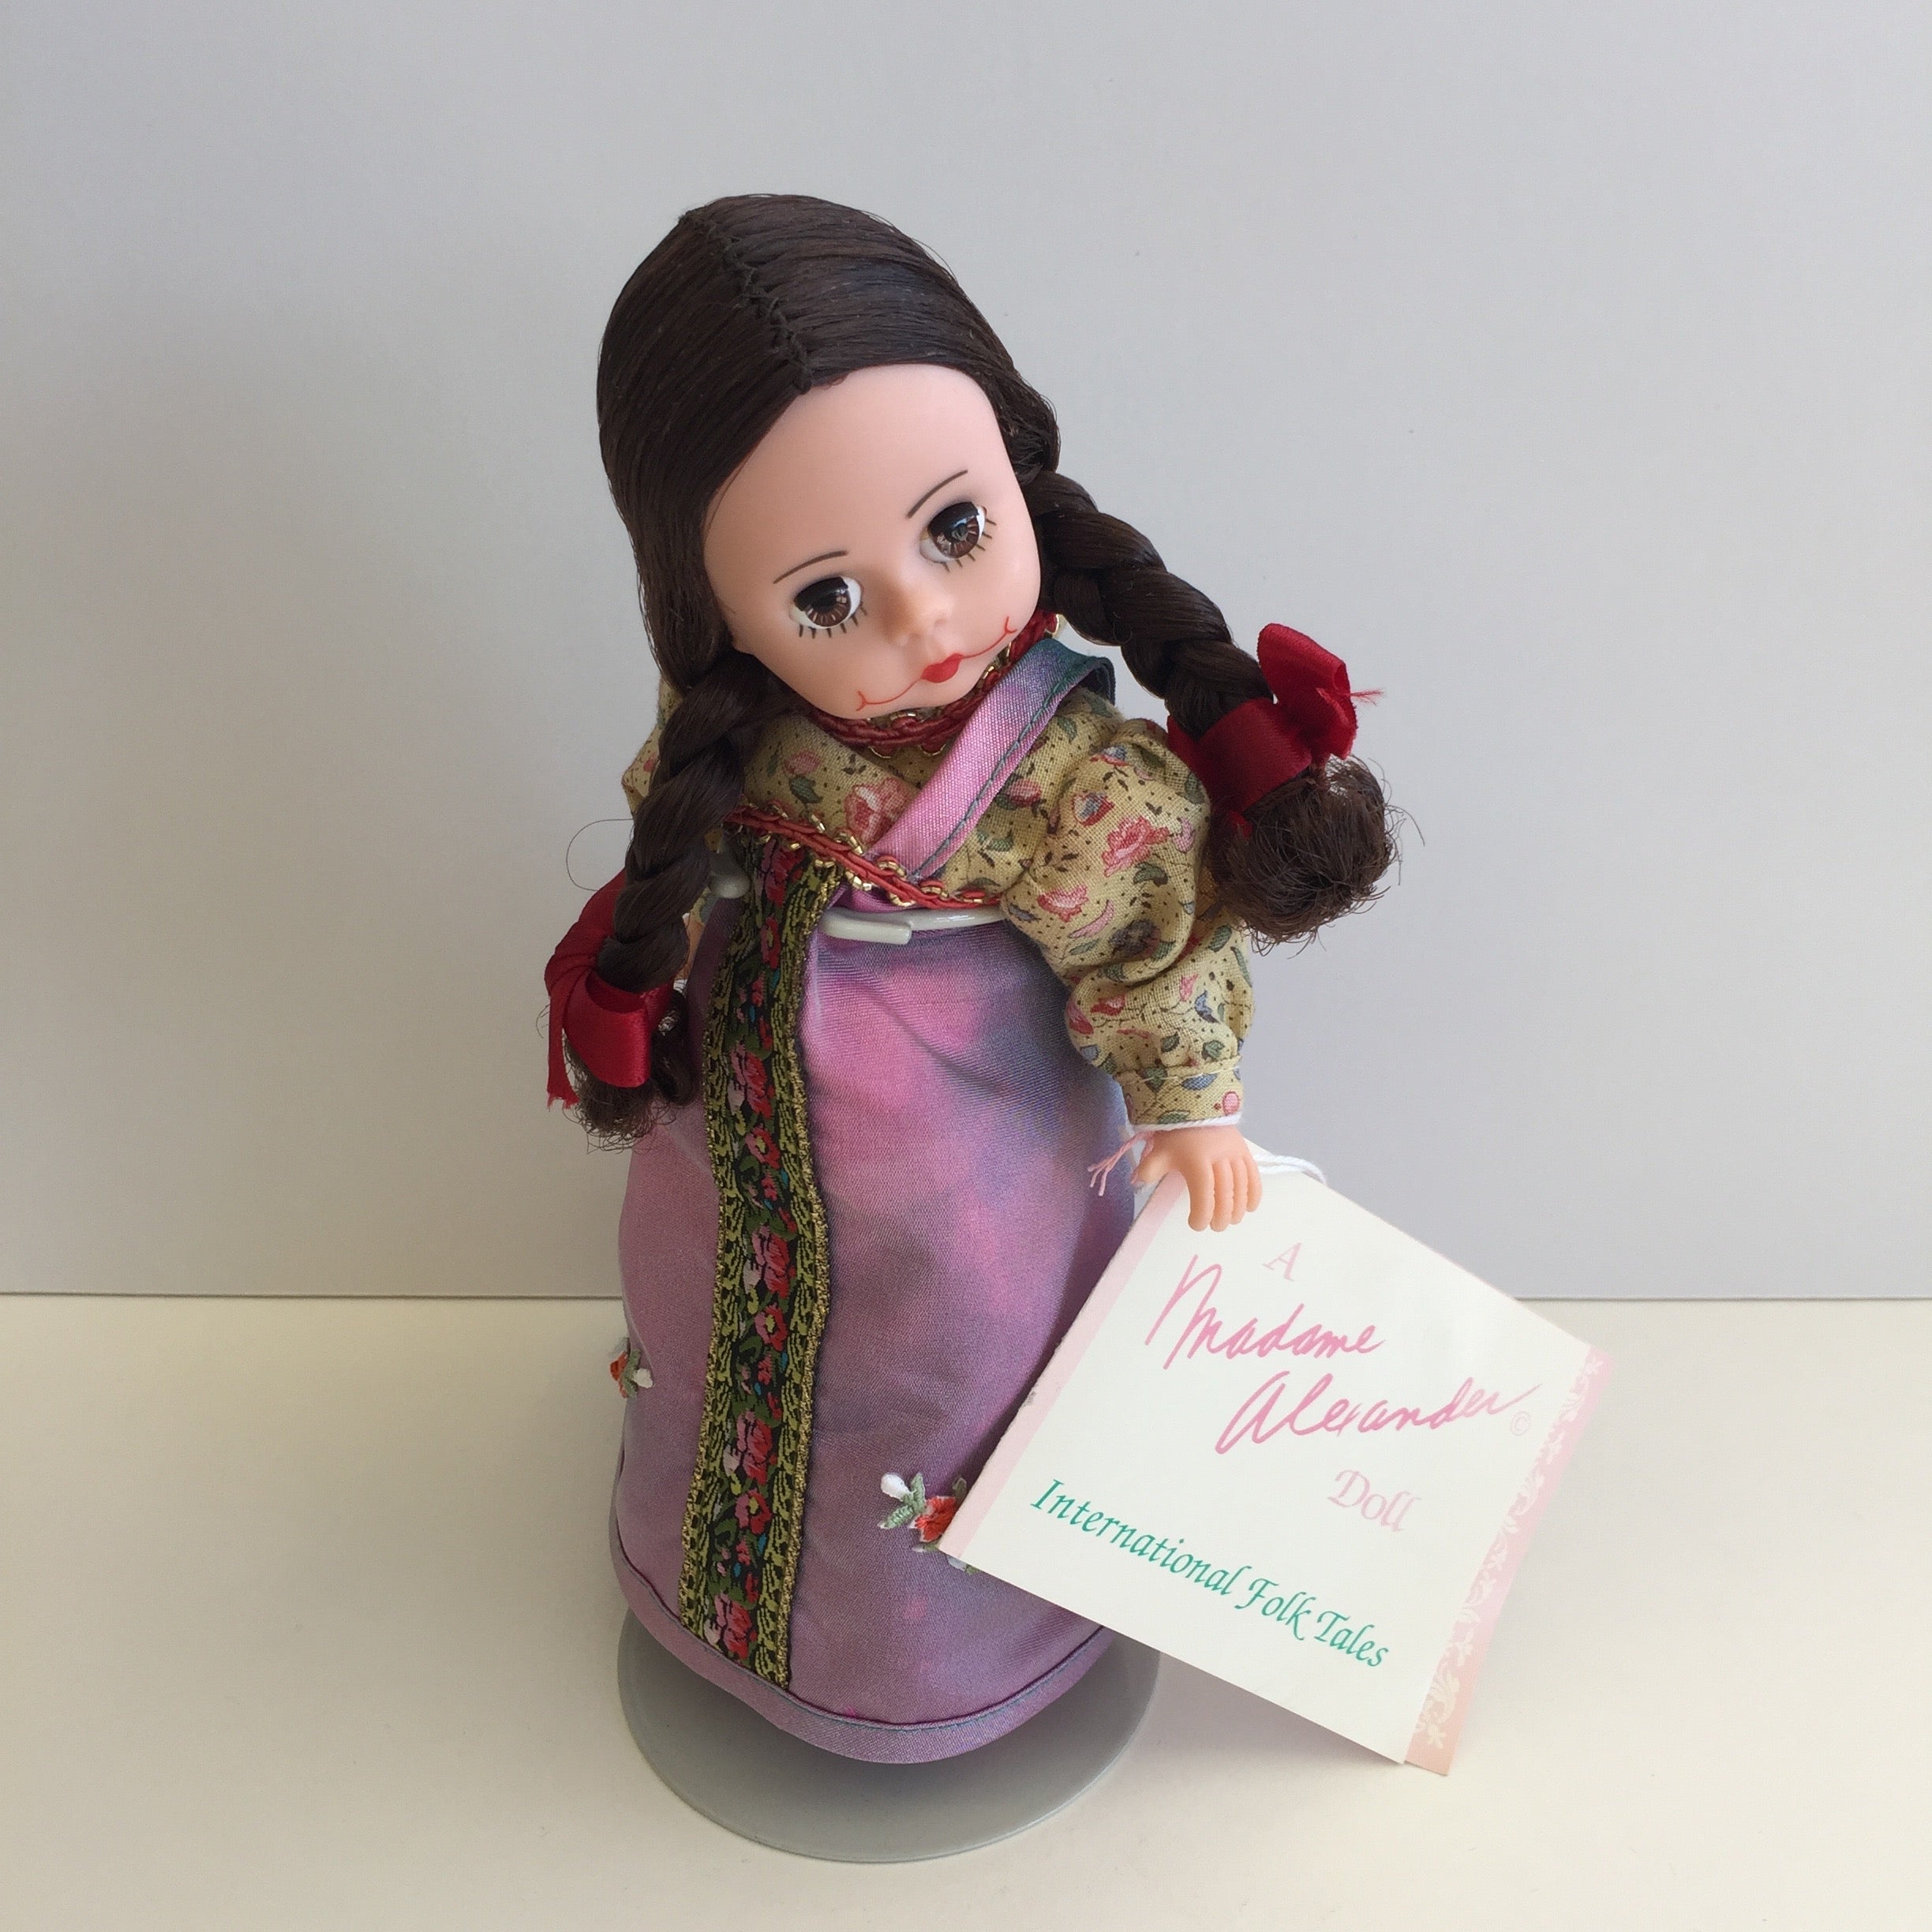 Mint Condition 1995 Madame Alexander 8" RUSSIA (PURPLE DRESS) Collectible Doll